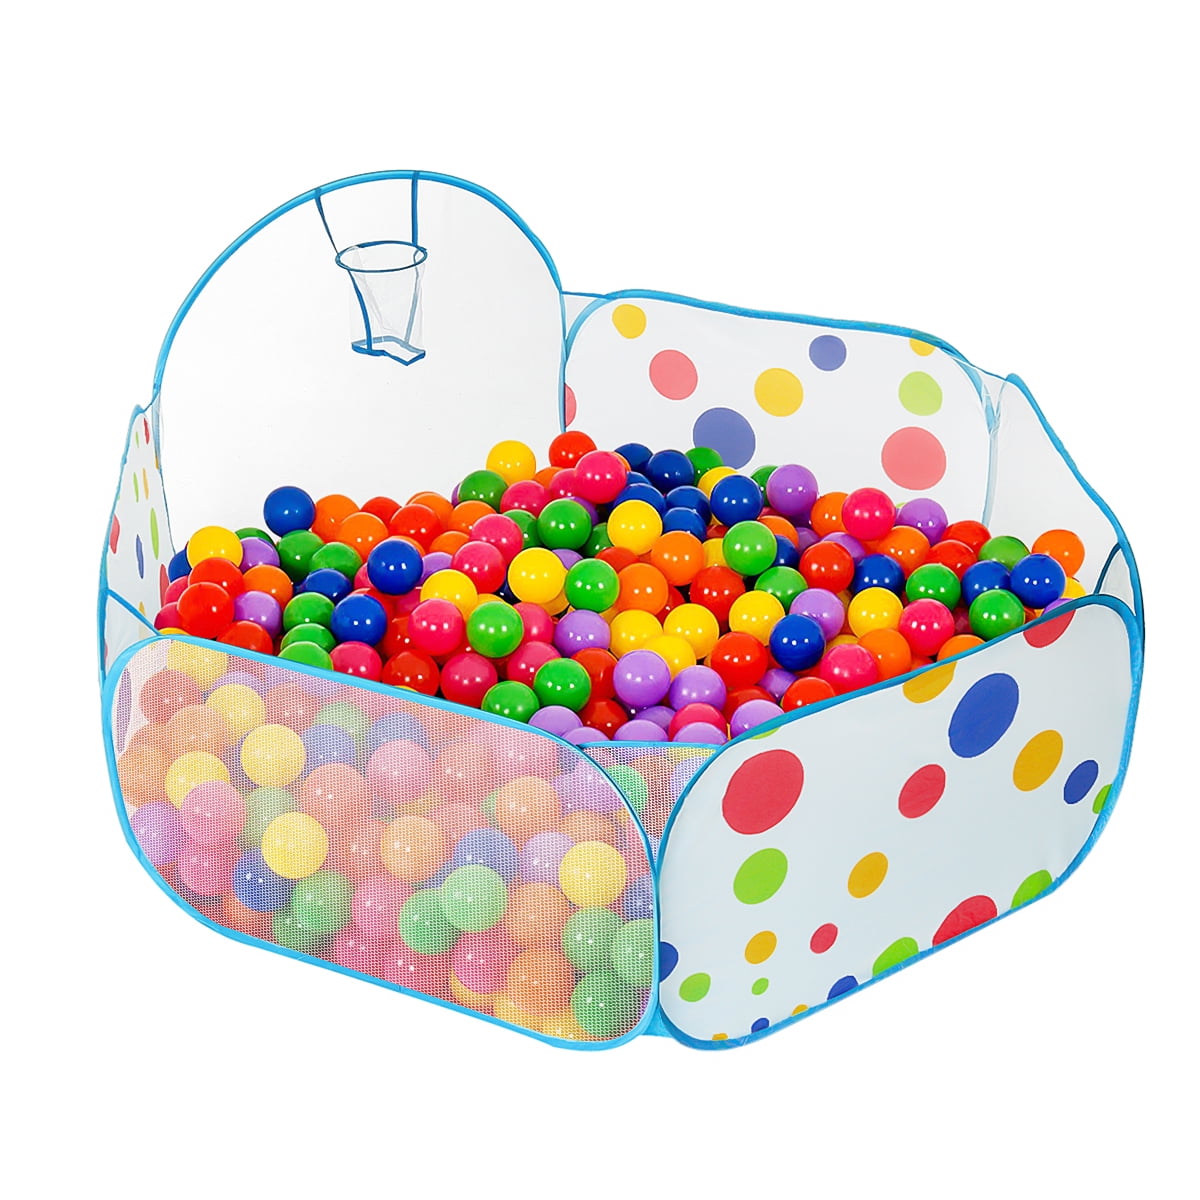 Kids Ball Pit Indoor & Outdoor Play Tent Ball Pit Pool with Basketball Hoop 